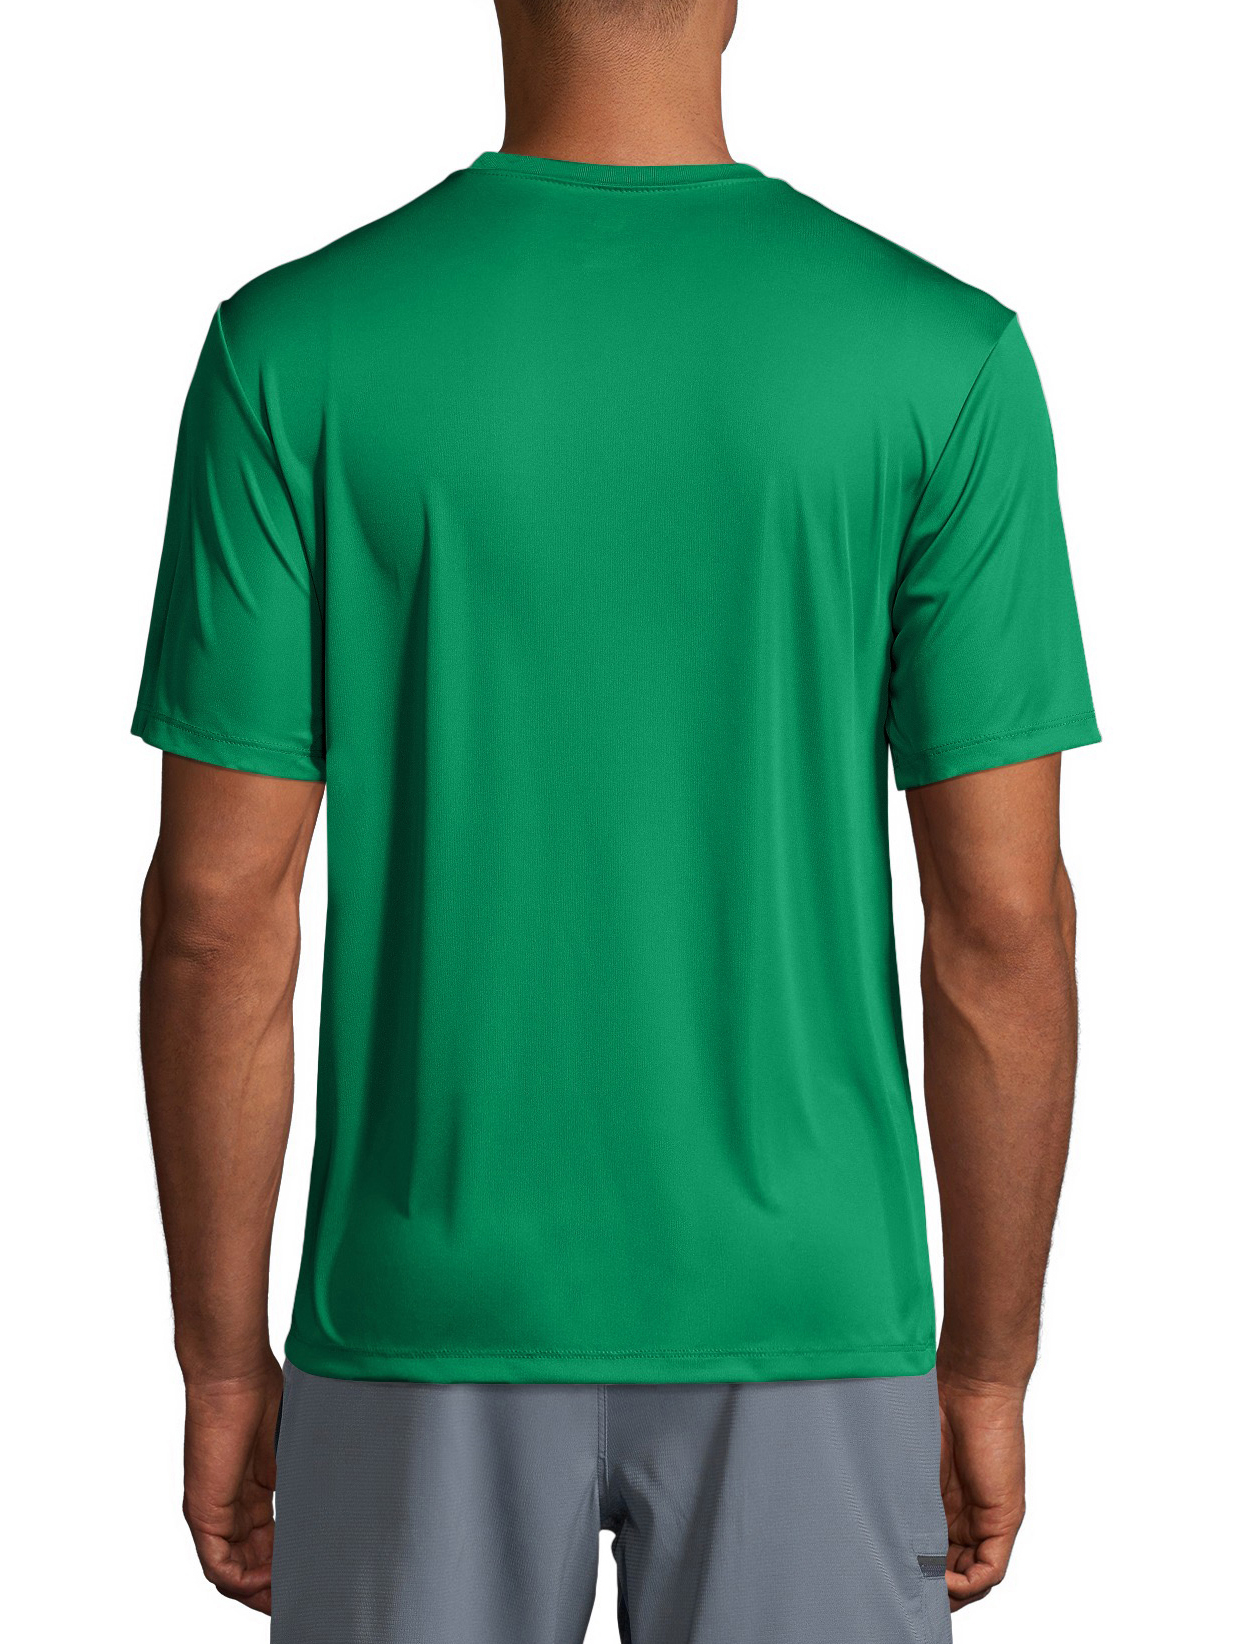 Hanes Sport Men's and Big Men's Short Sleeve Cool Dri Performance Tee (40+ UPF), Up to Size 3XL - image 4 of 6